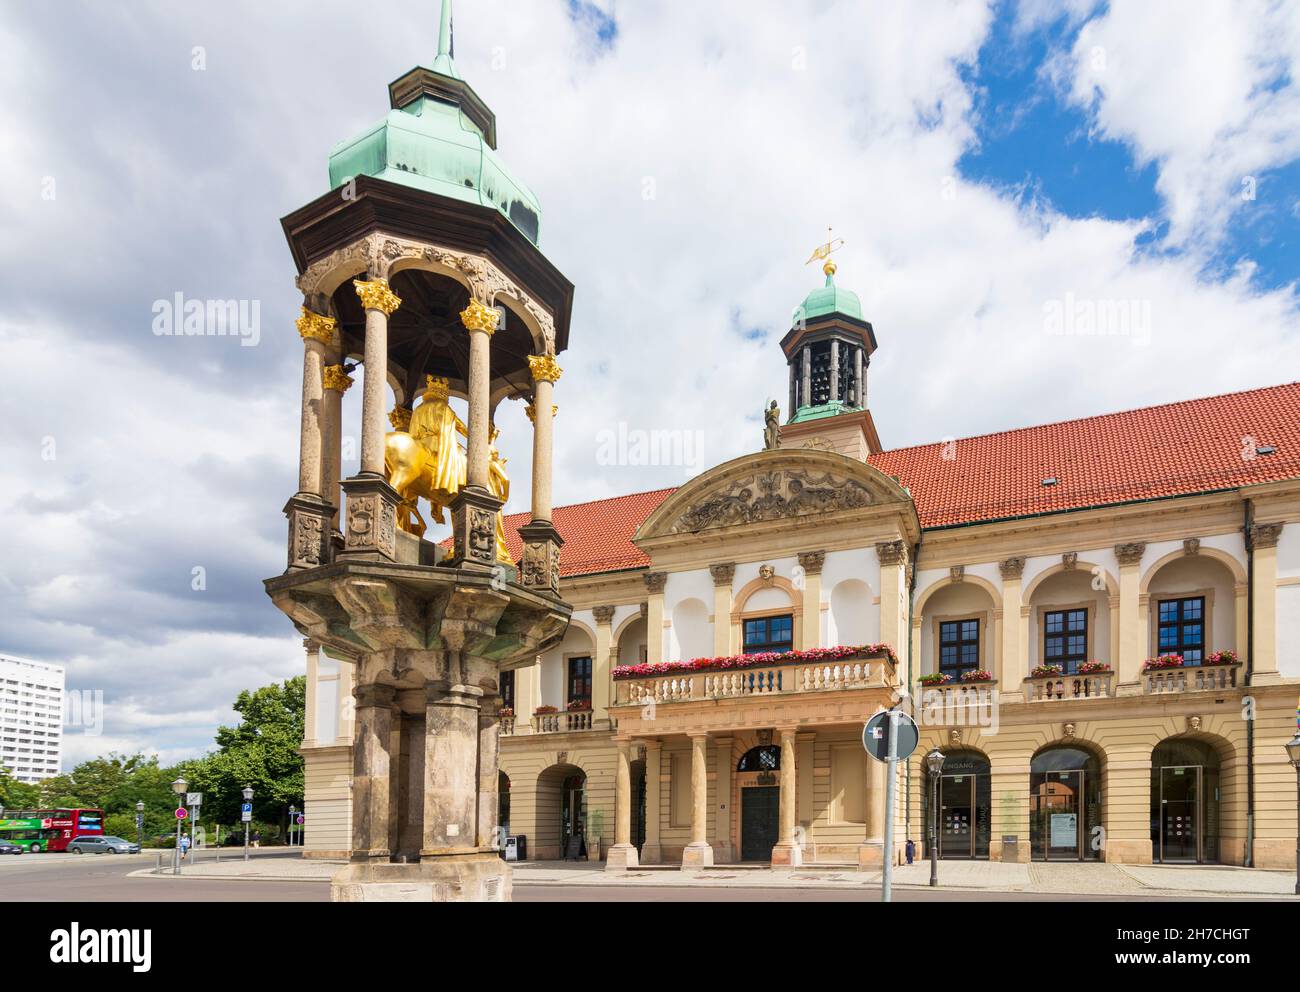 Magdeburg: Old Town Hall, Replica of the Magdeburg rider in , Sachsen-Anhalt, Saxony-Anhalt, Germany Stock Photo